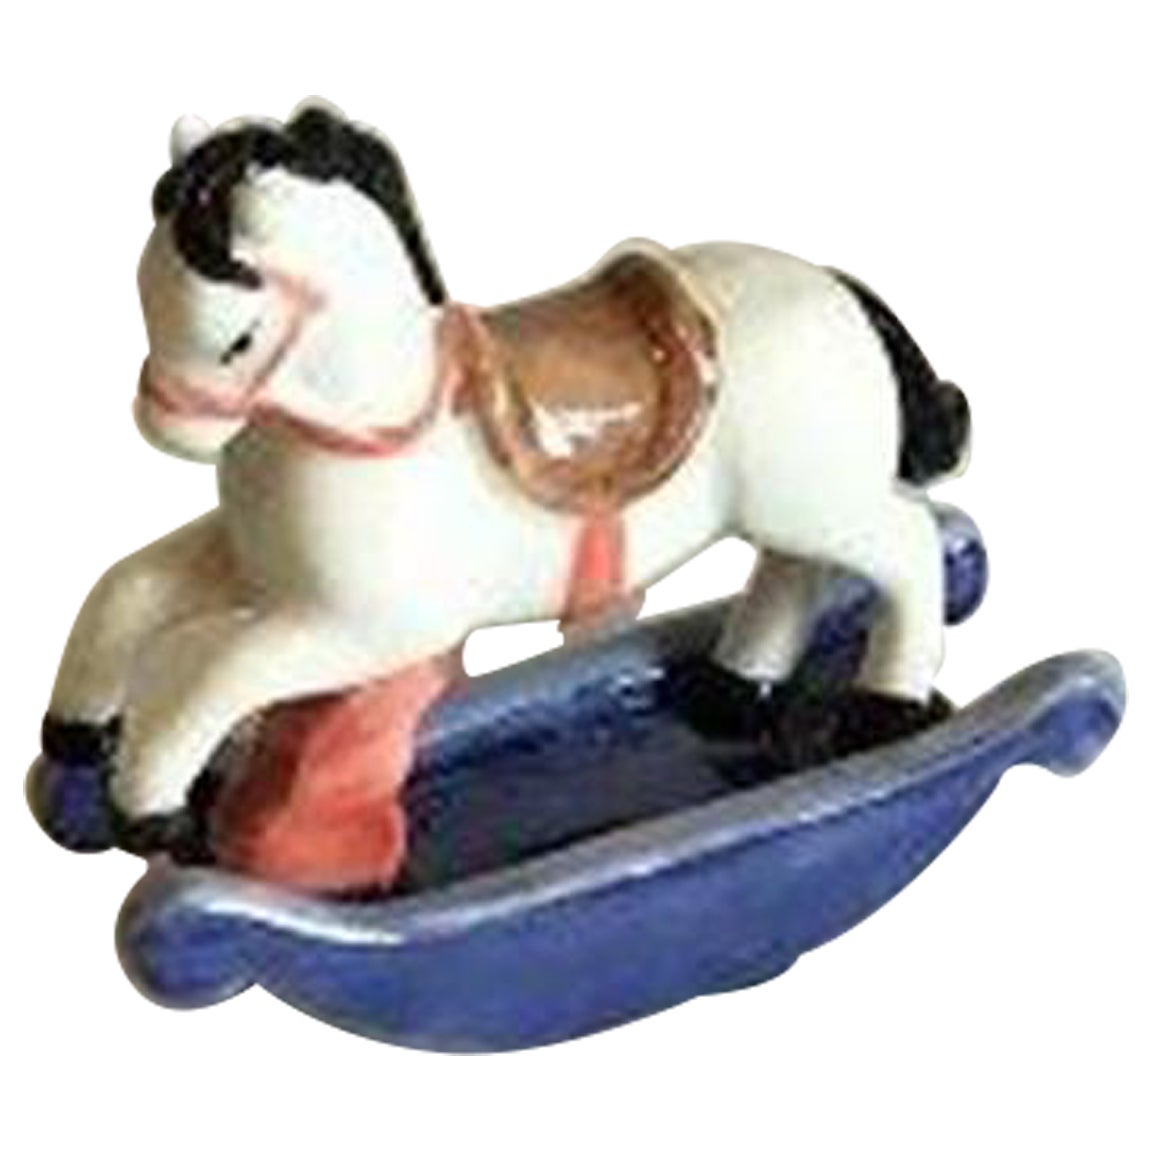 Bing & Grondahl Cheistmas Figurine of Rocking Horse No 143 For Sale